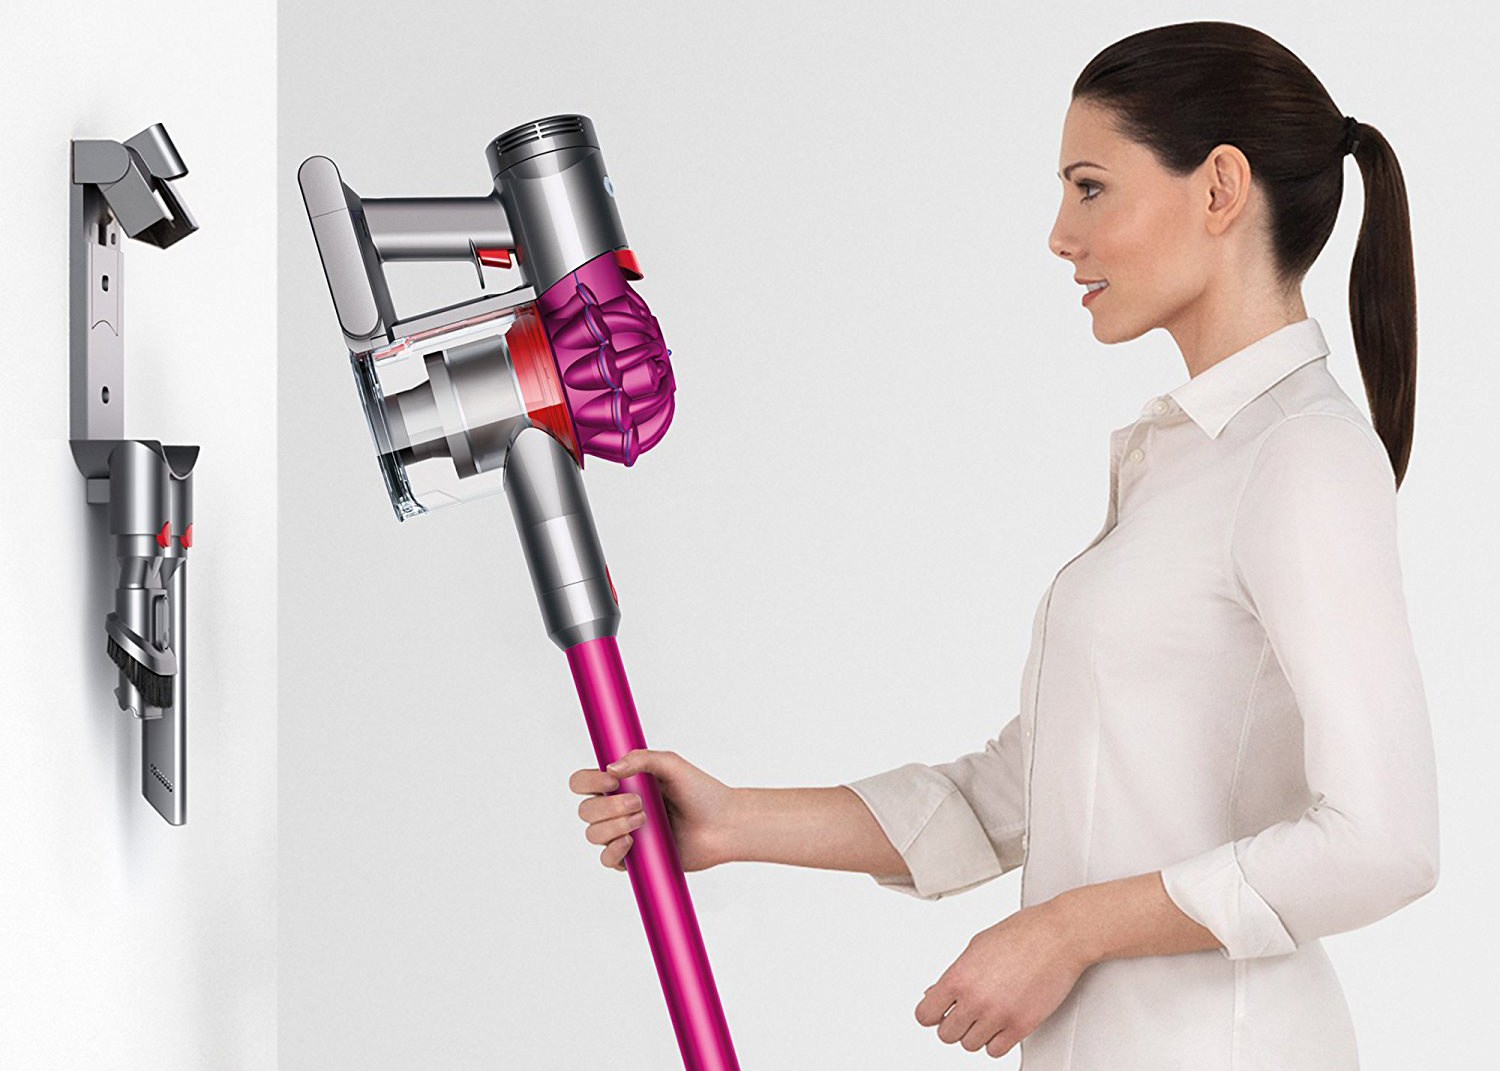 Black Friday just came early for two of Dyson’s best cordless stick